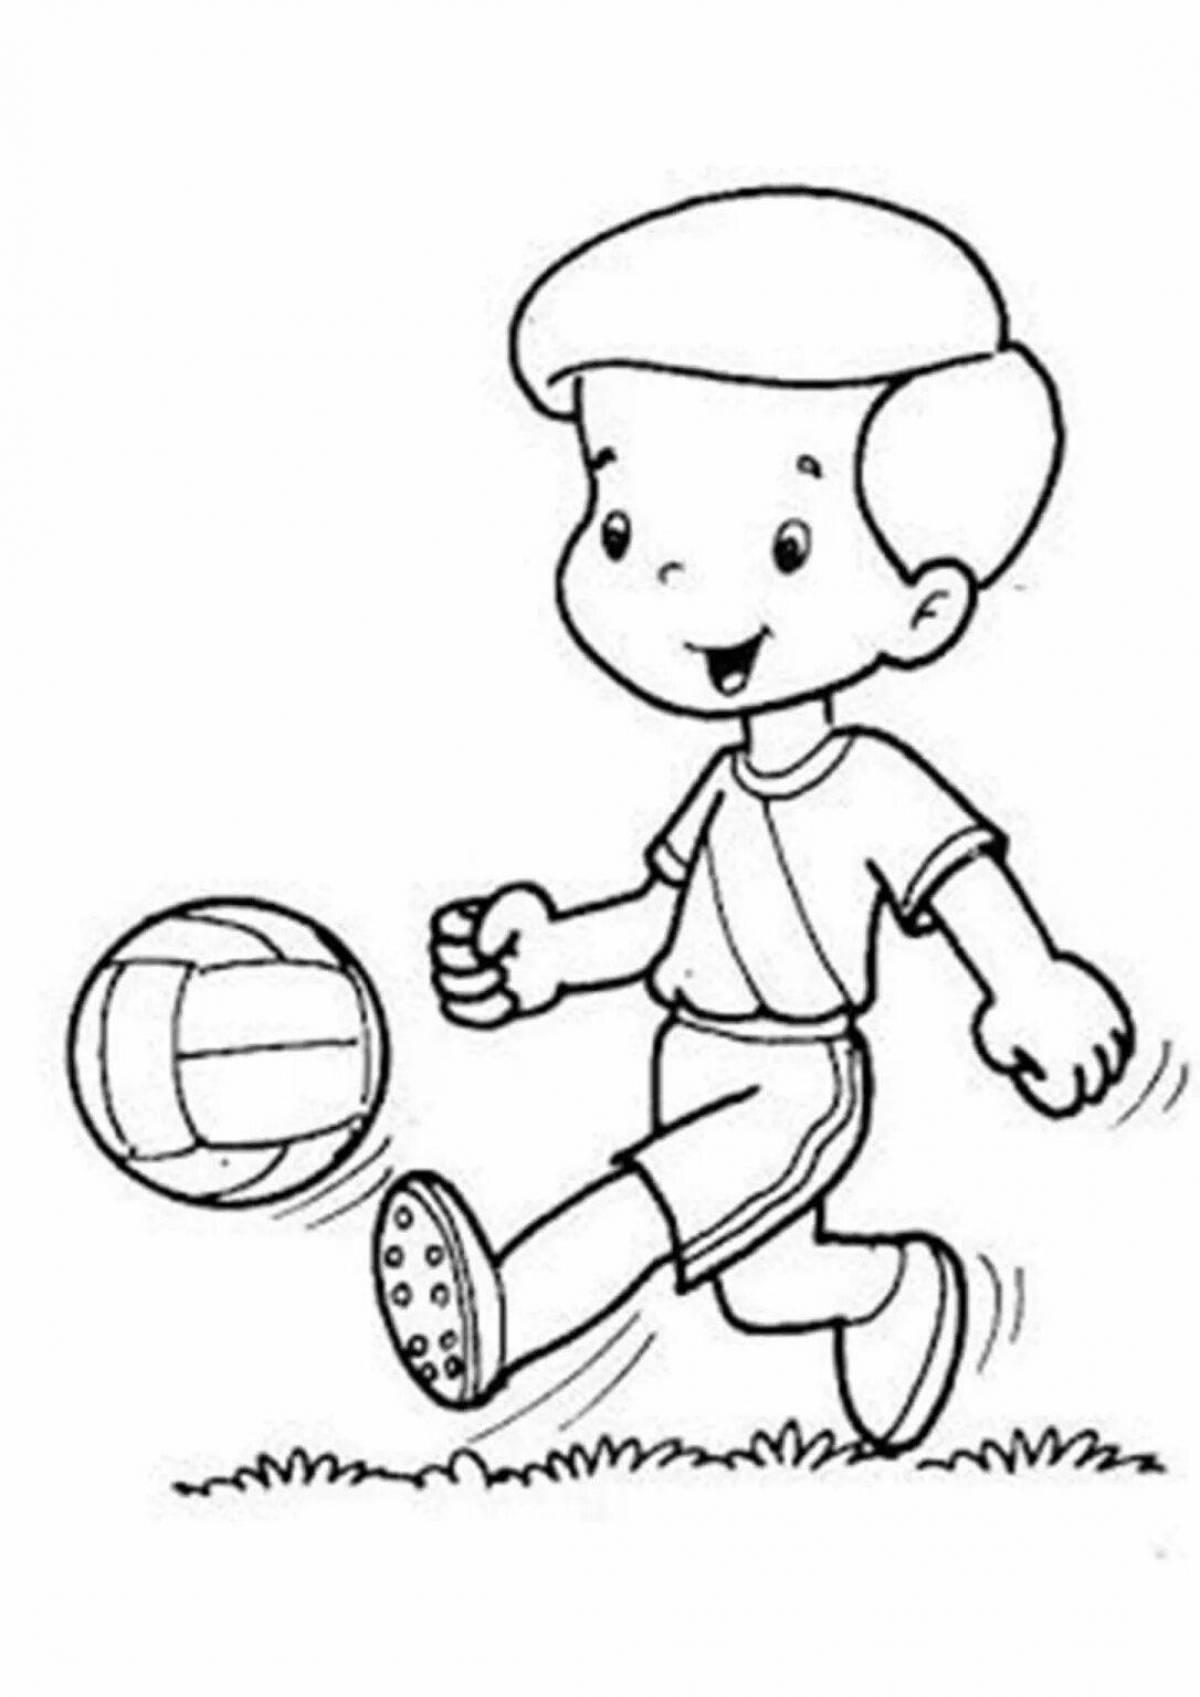 Recreational physical education and sports coloring book